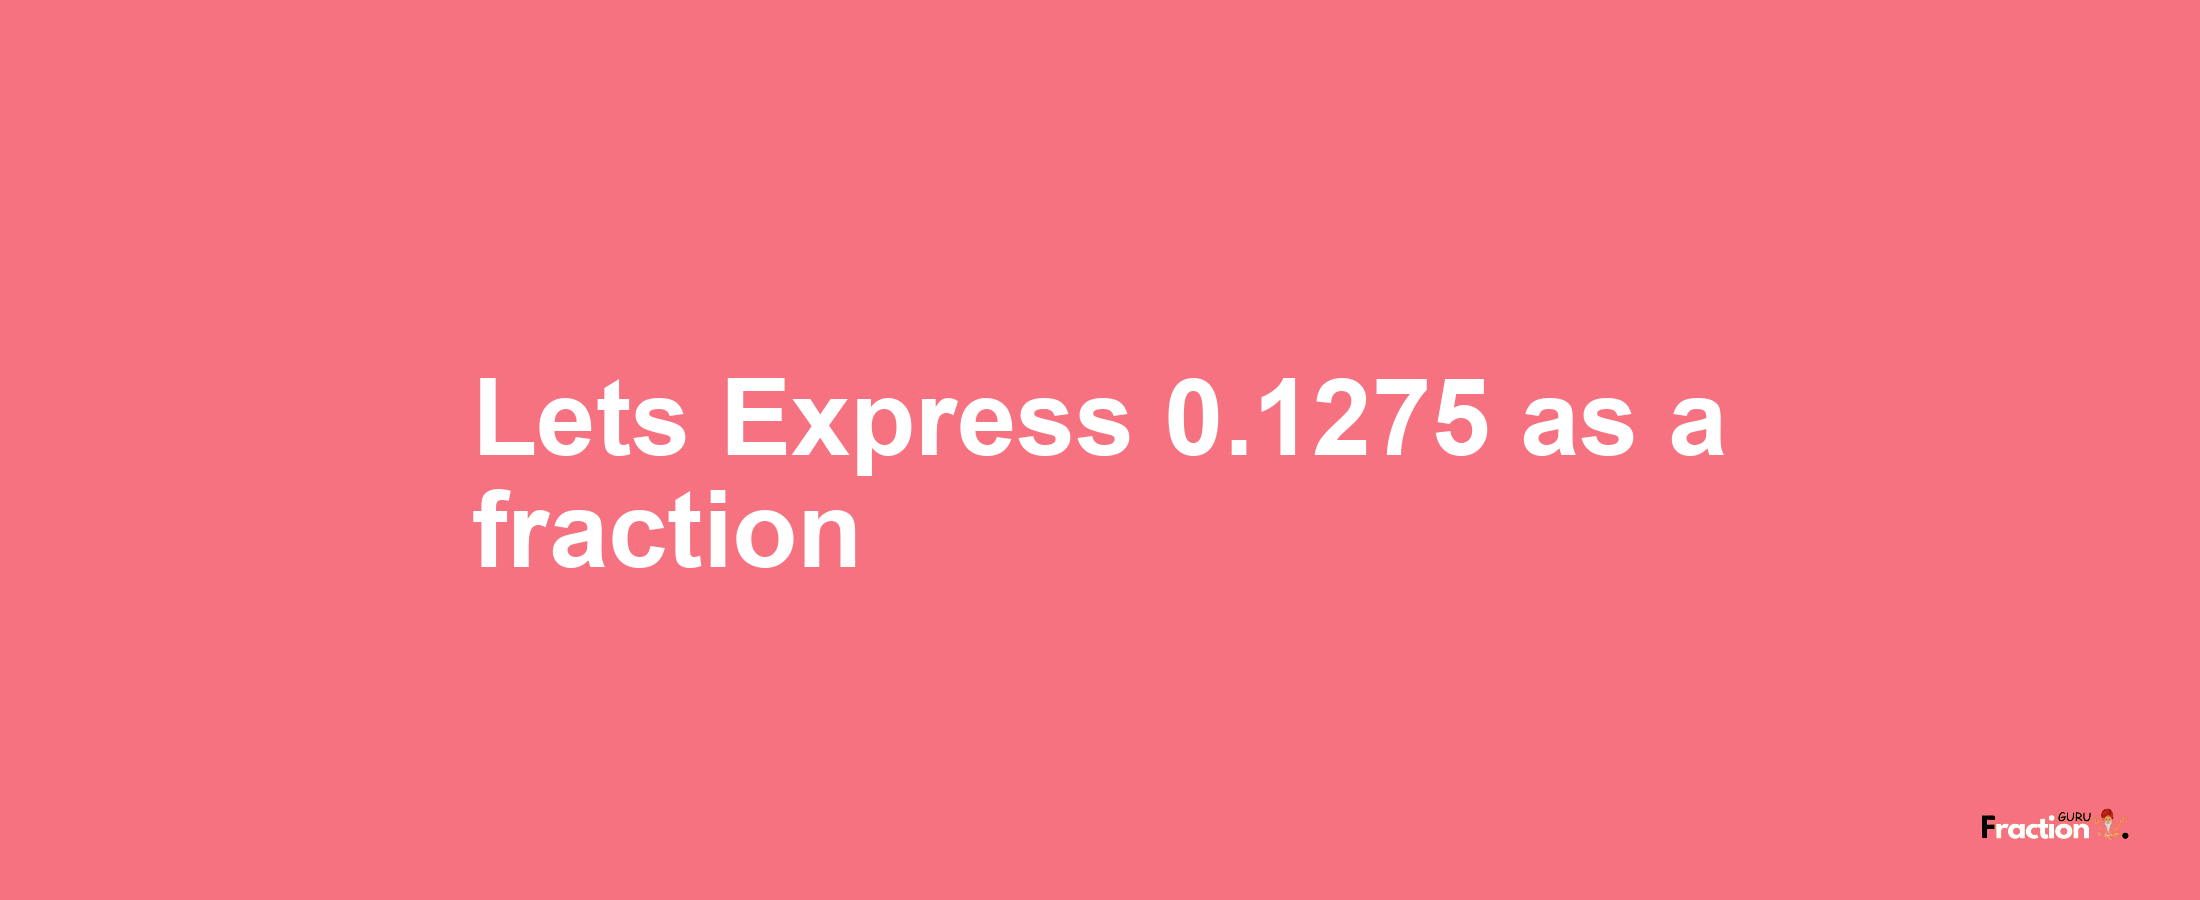 Lets Express 0.1275 as afraction